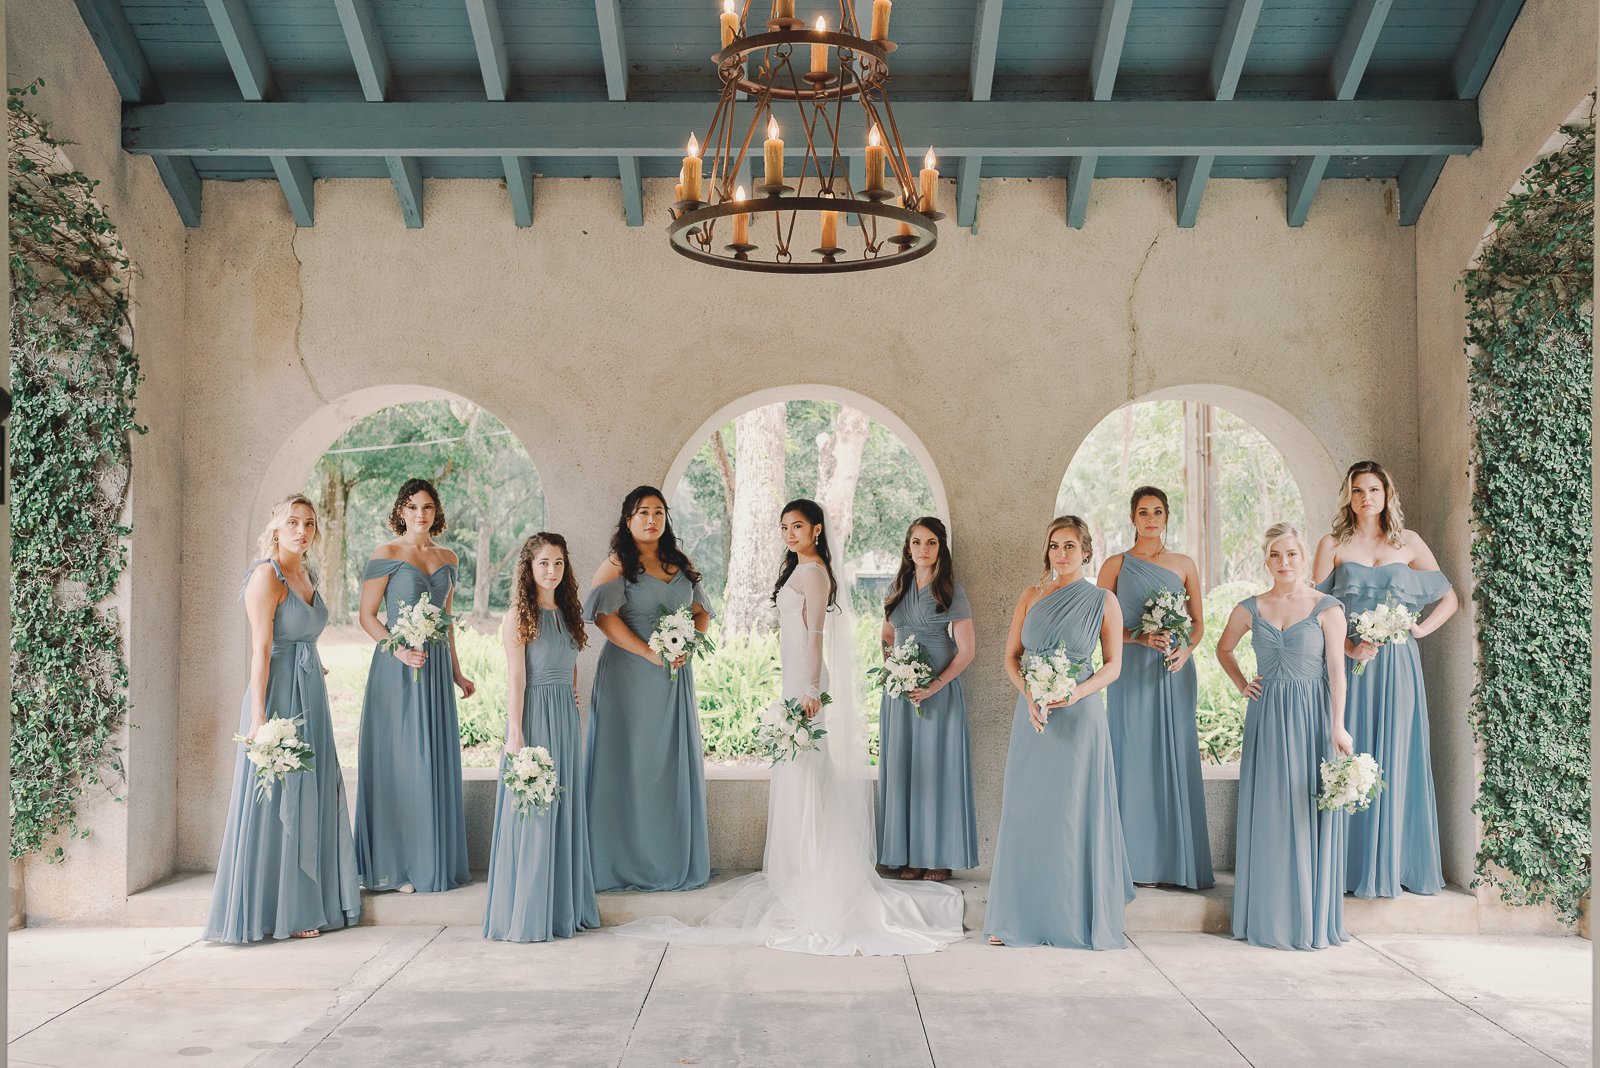 A beautiful bride surrounded by her bridal party of 9. She has 4 to her right and 5 to her left. All the women are holding delicate bouquets of flowers and the bridesmaids are dressed in long pale blue dresses.